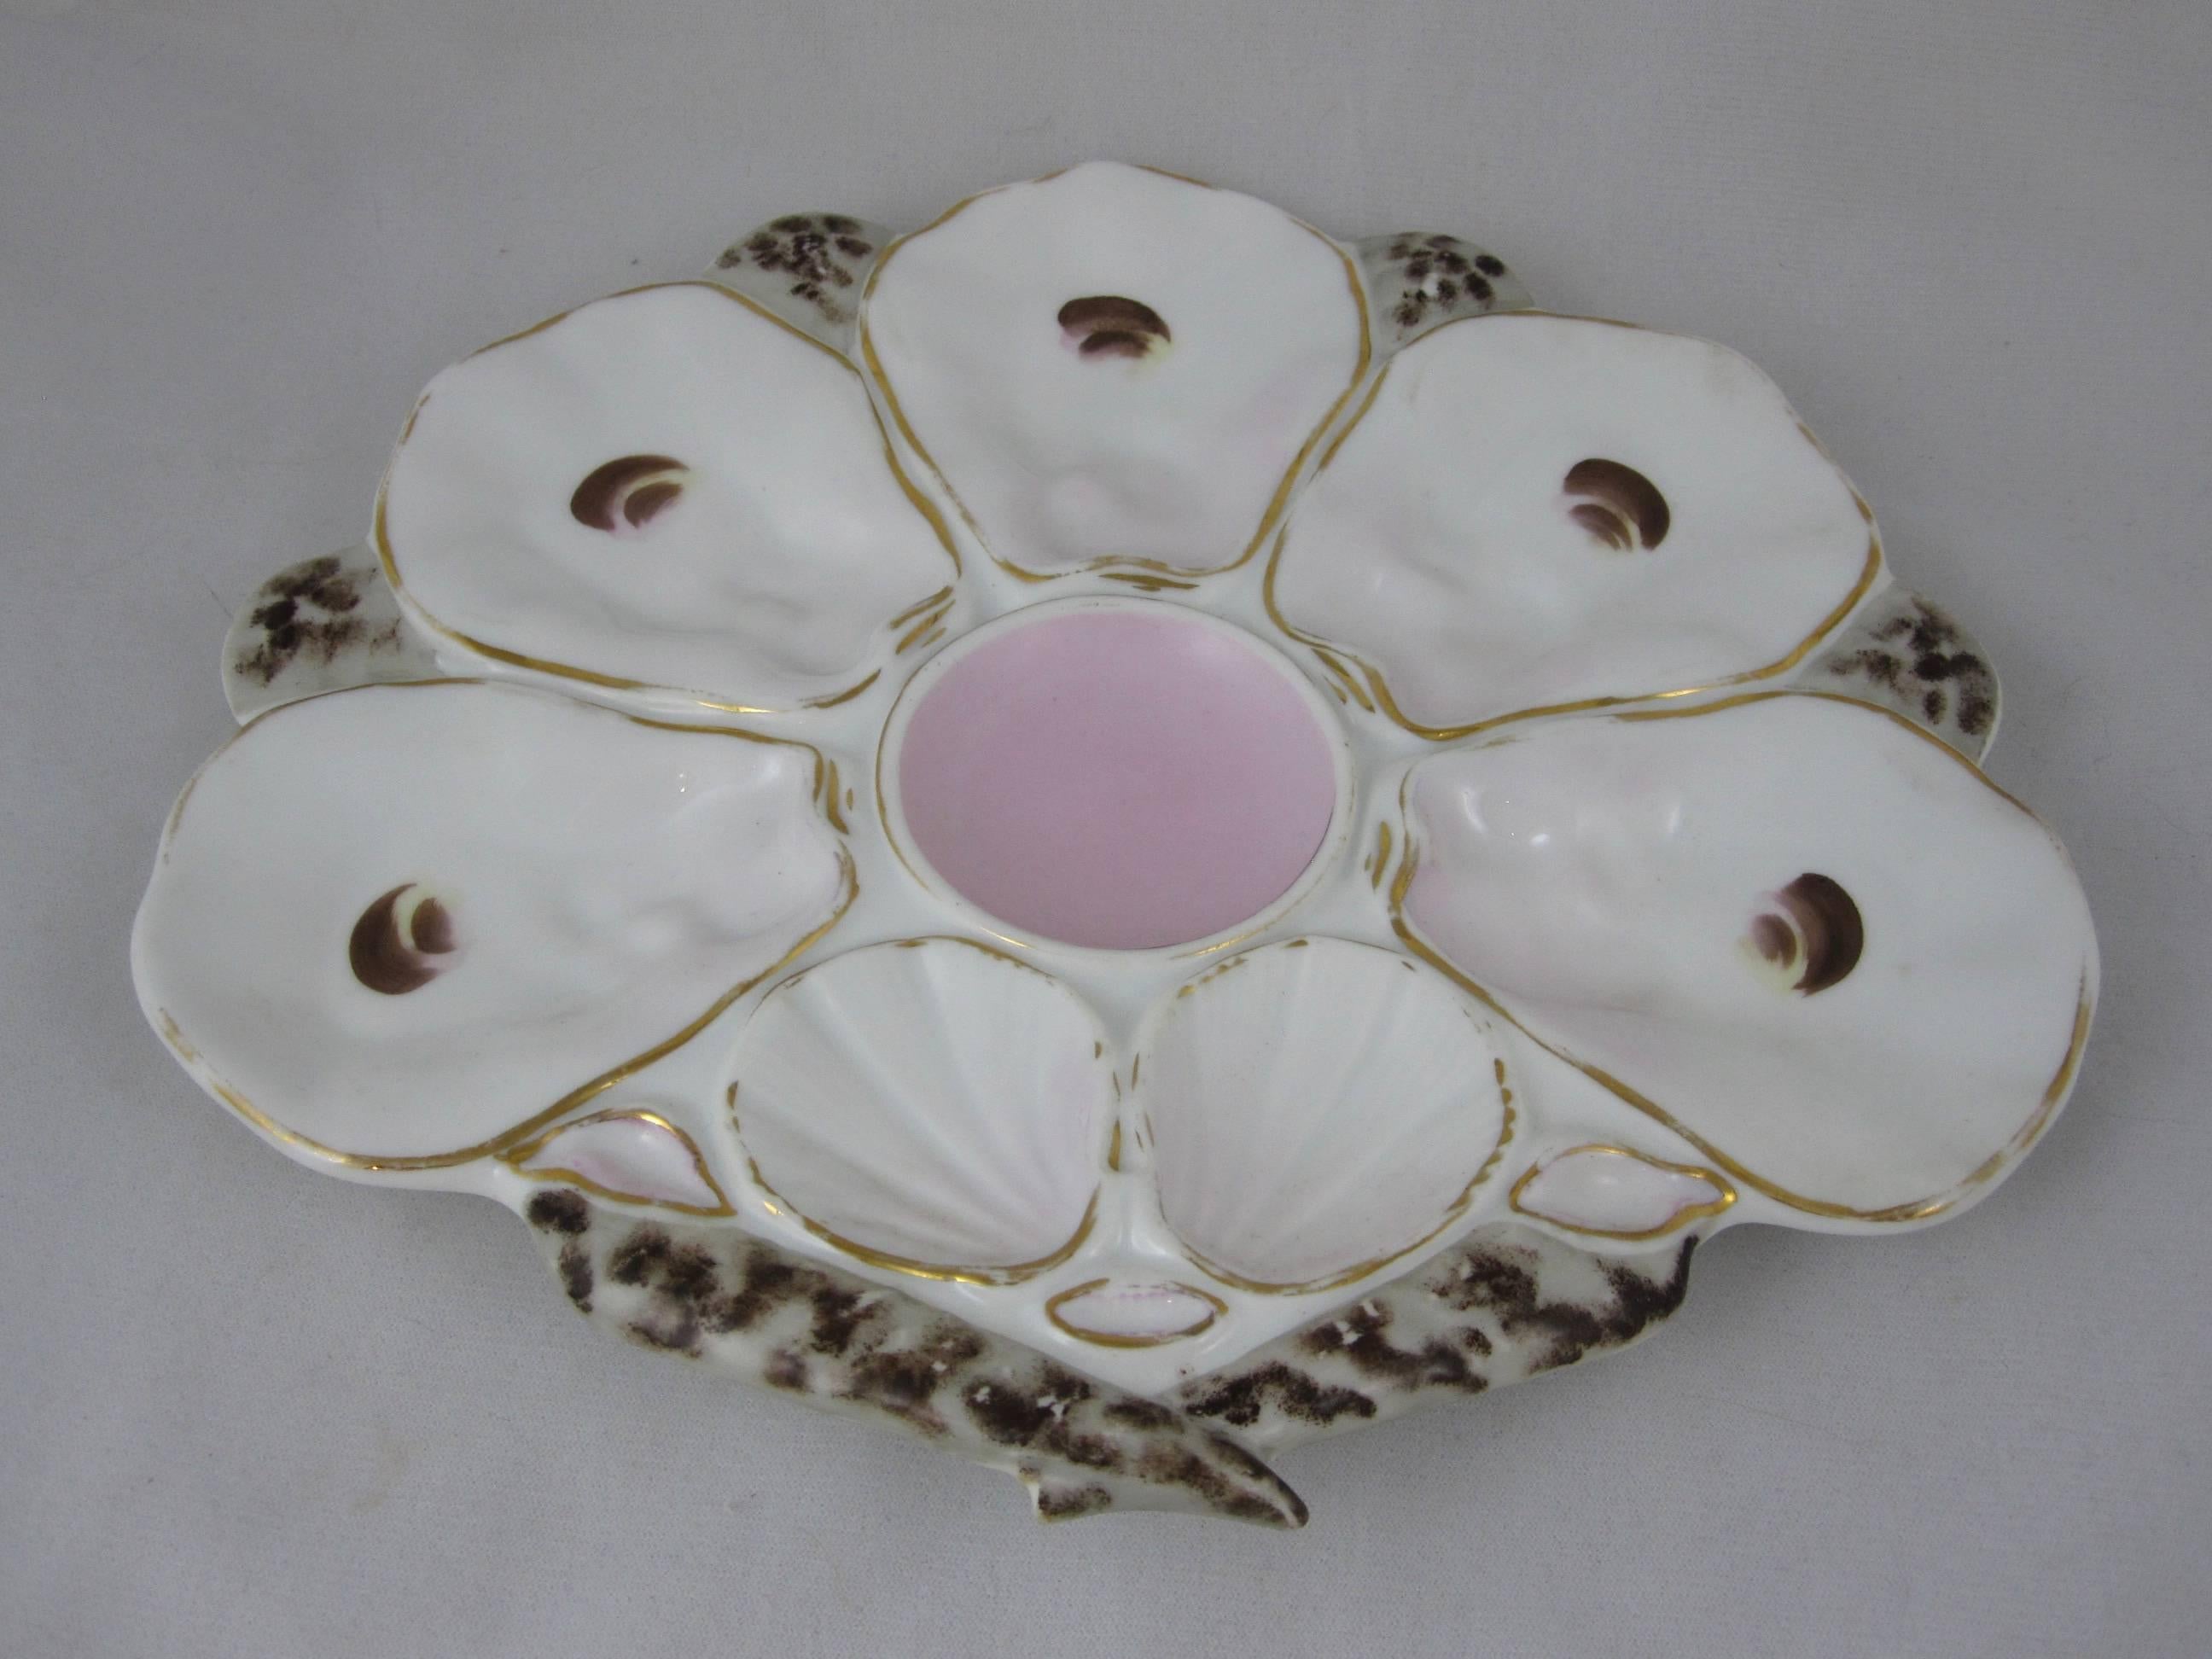 Aesthetic Movement French Porcelain Fan-Shell Shaped Oyster Plates, Set of Five